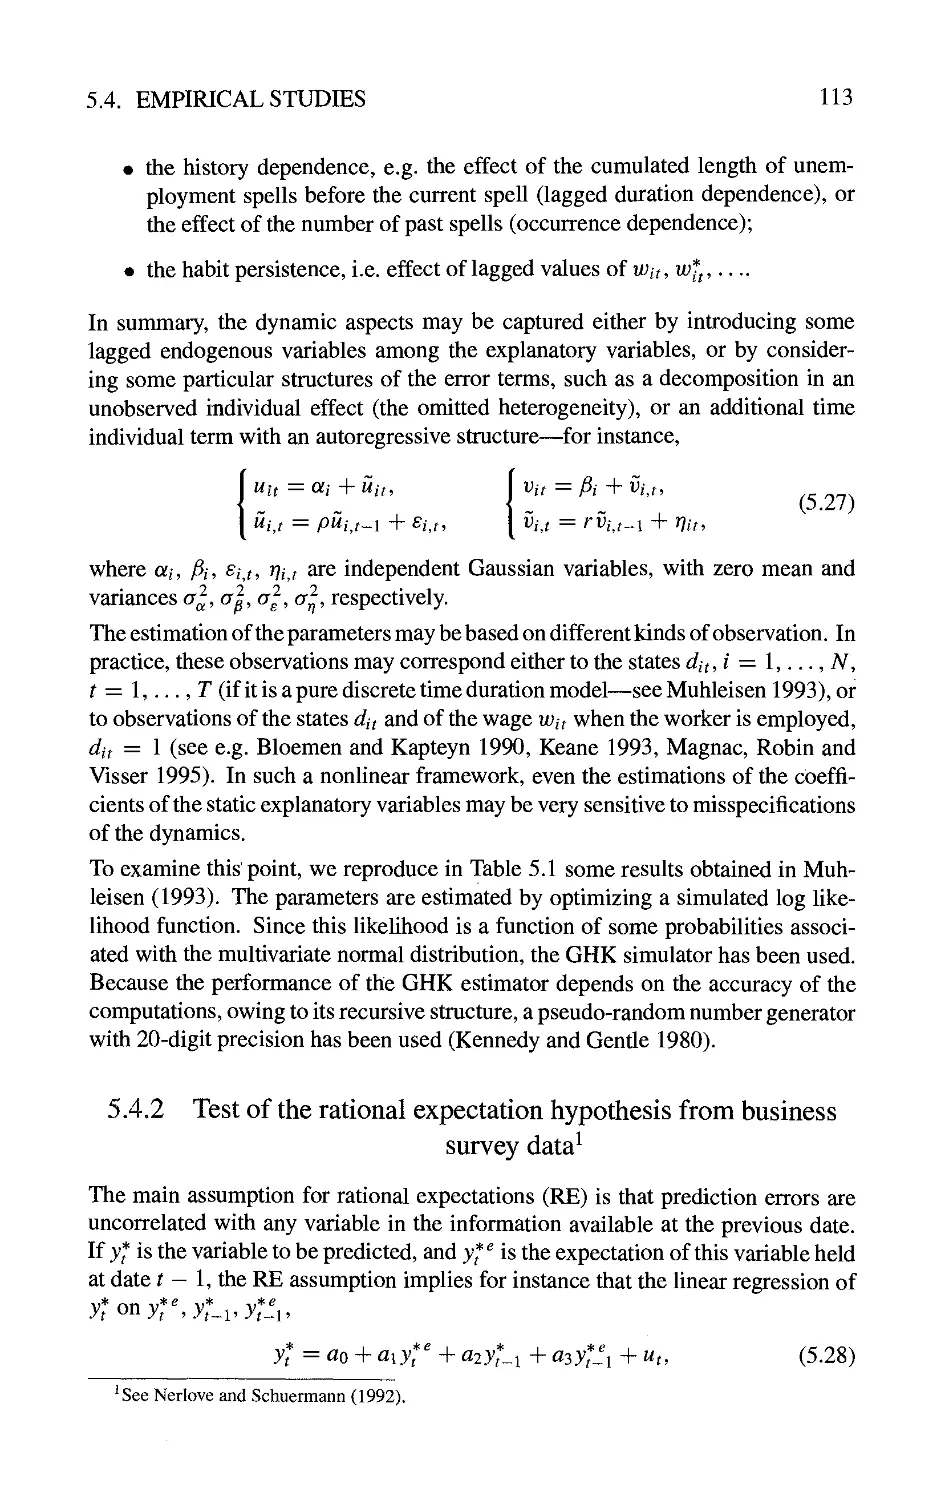 5.4.2 Test of the rational expectation hypothesis from business survey data